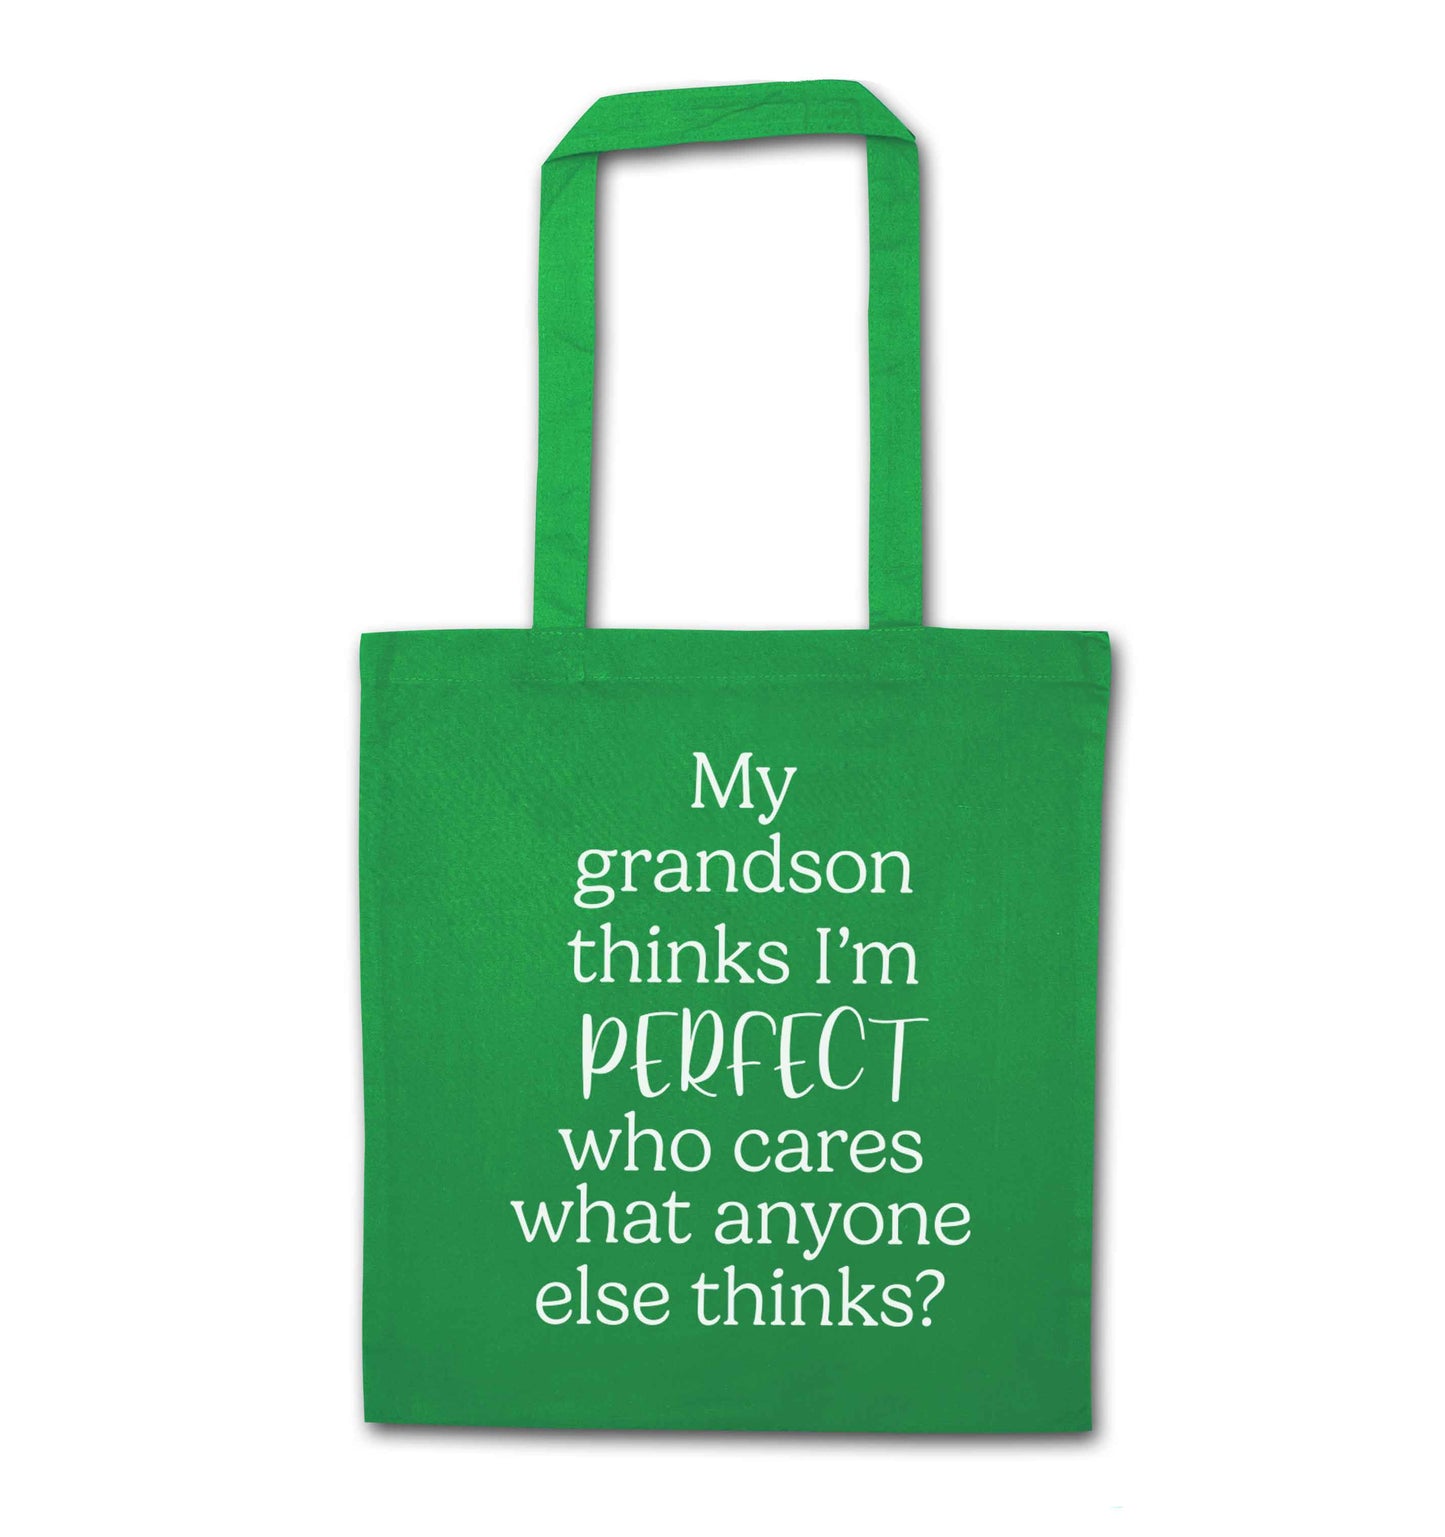 My grandson thinks I'm perfect green tote bag